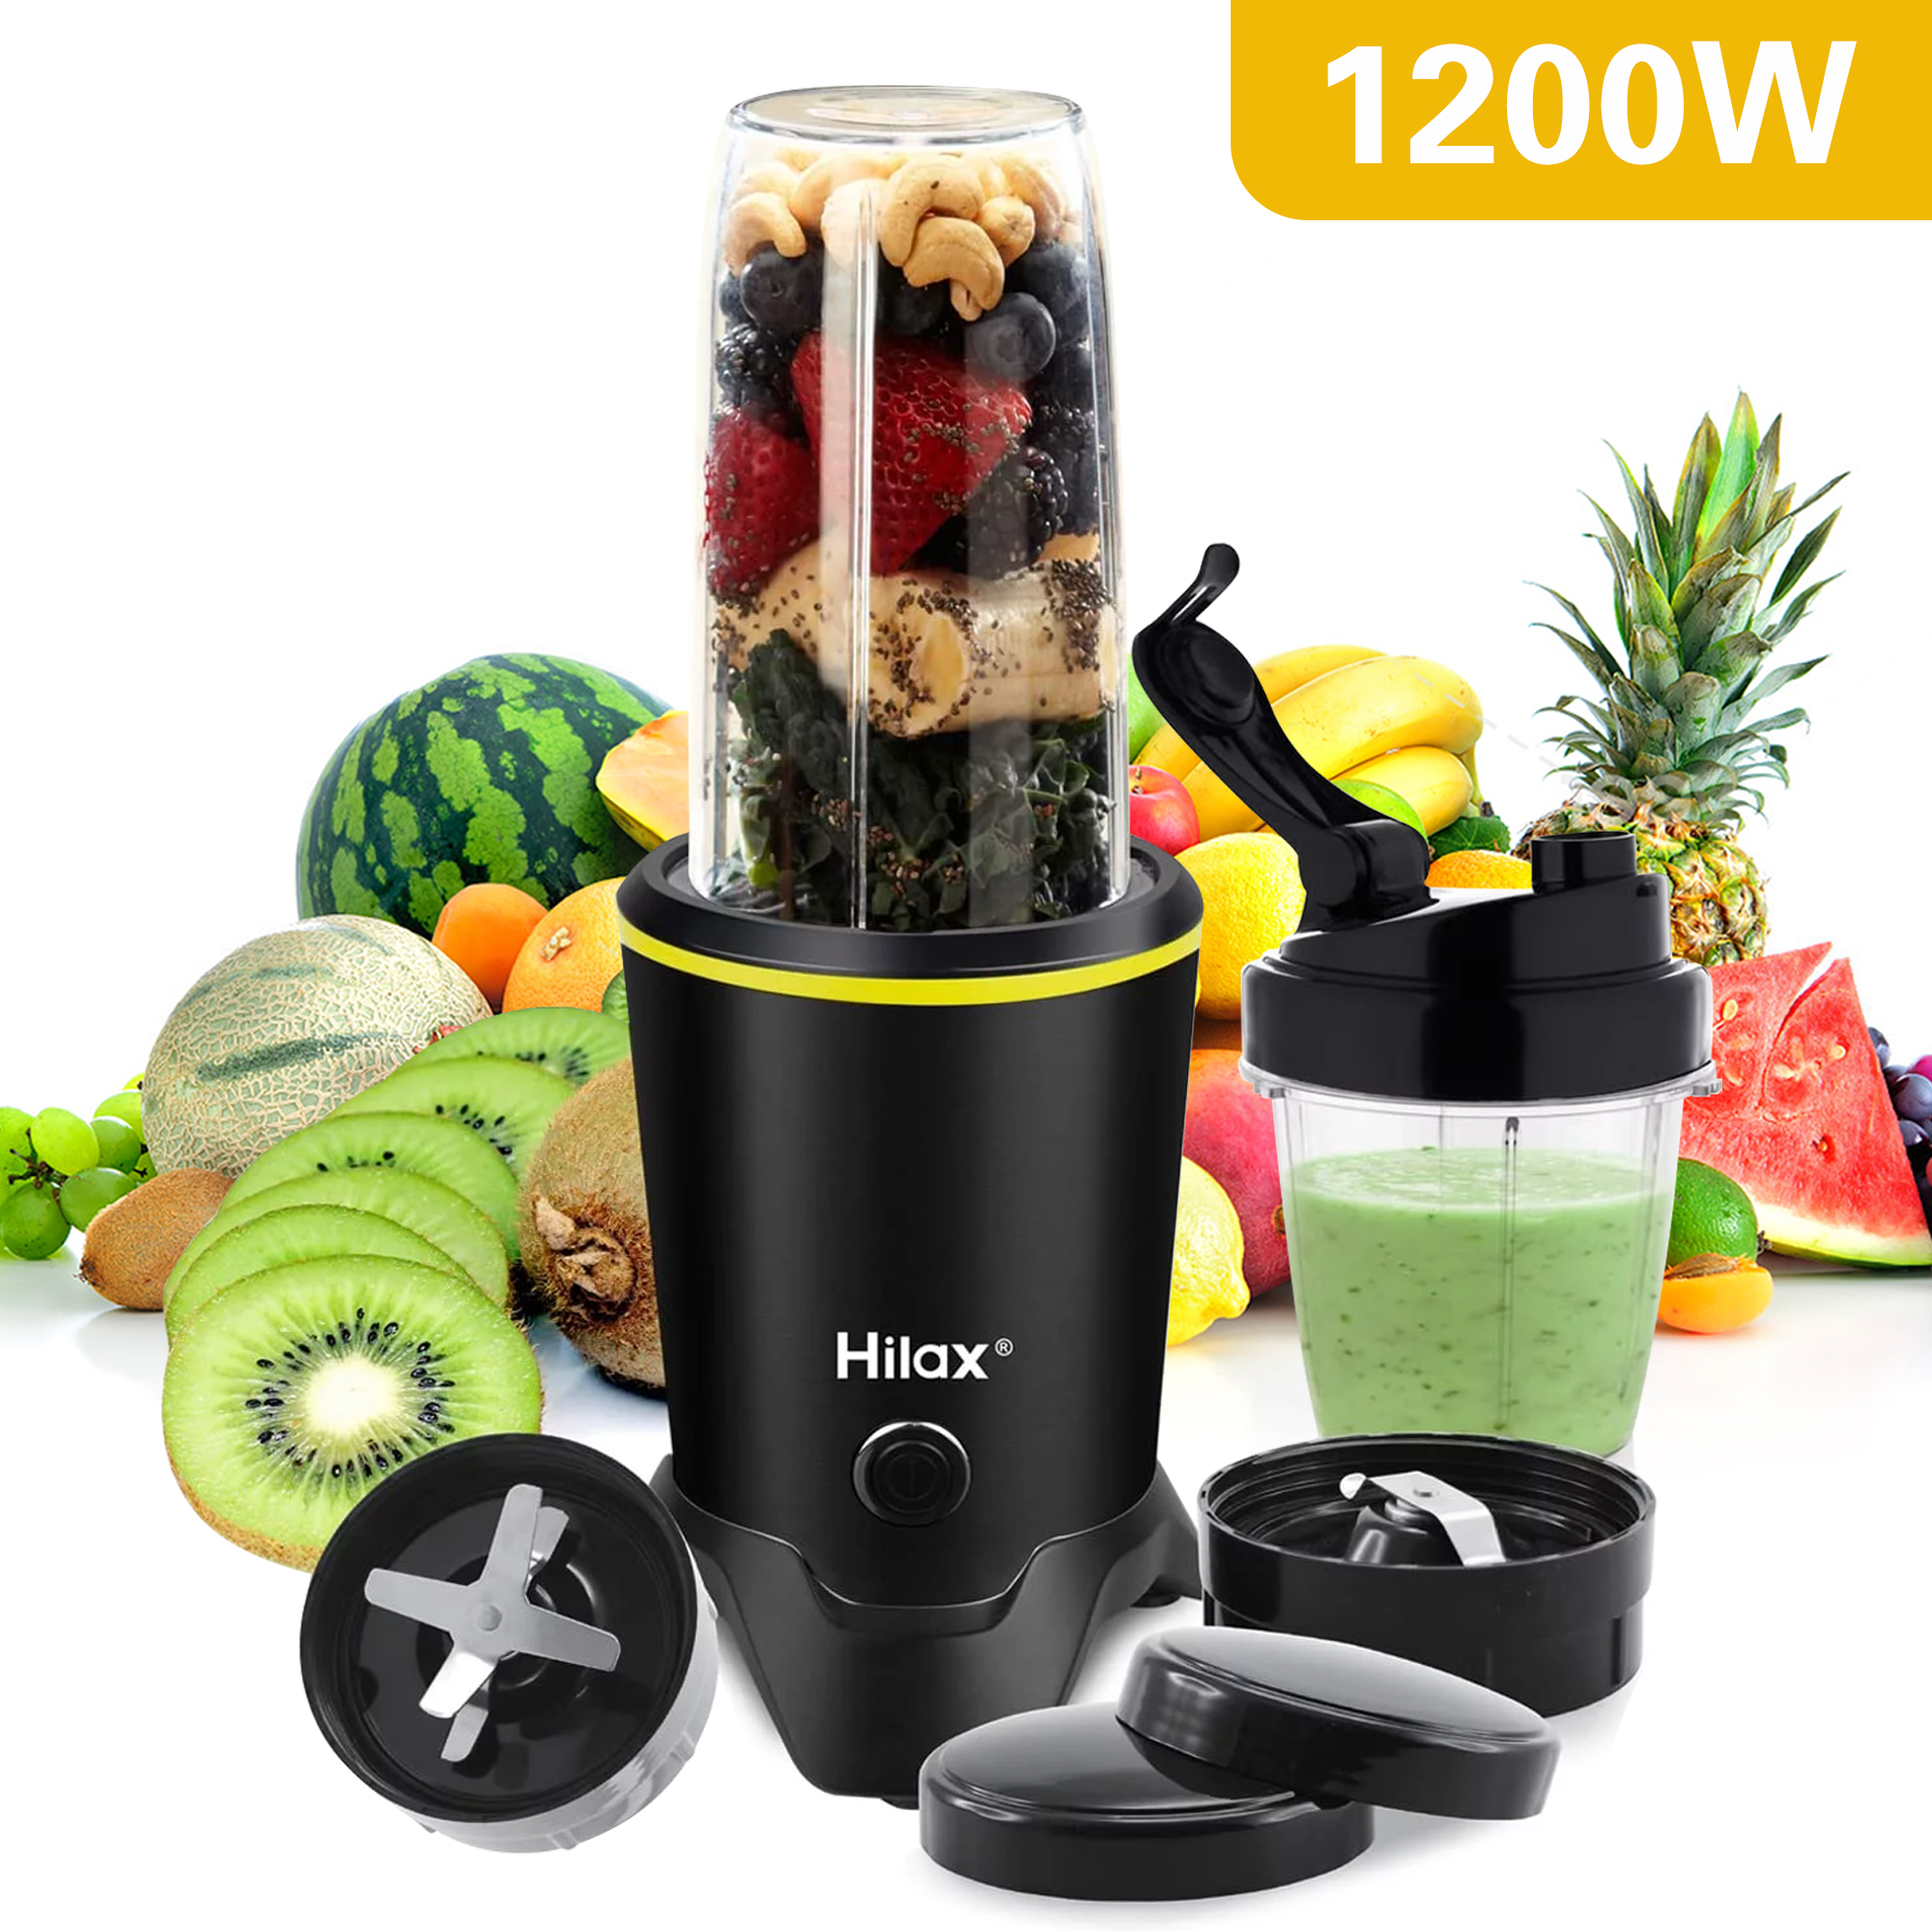 Hilax Food Processor Blender Combo 8 in 1 Juicing Slicing Kneading -  household items - by owner - housewares sale 